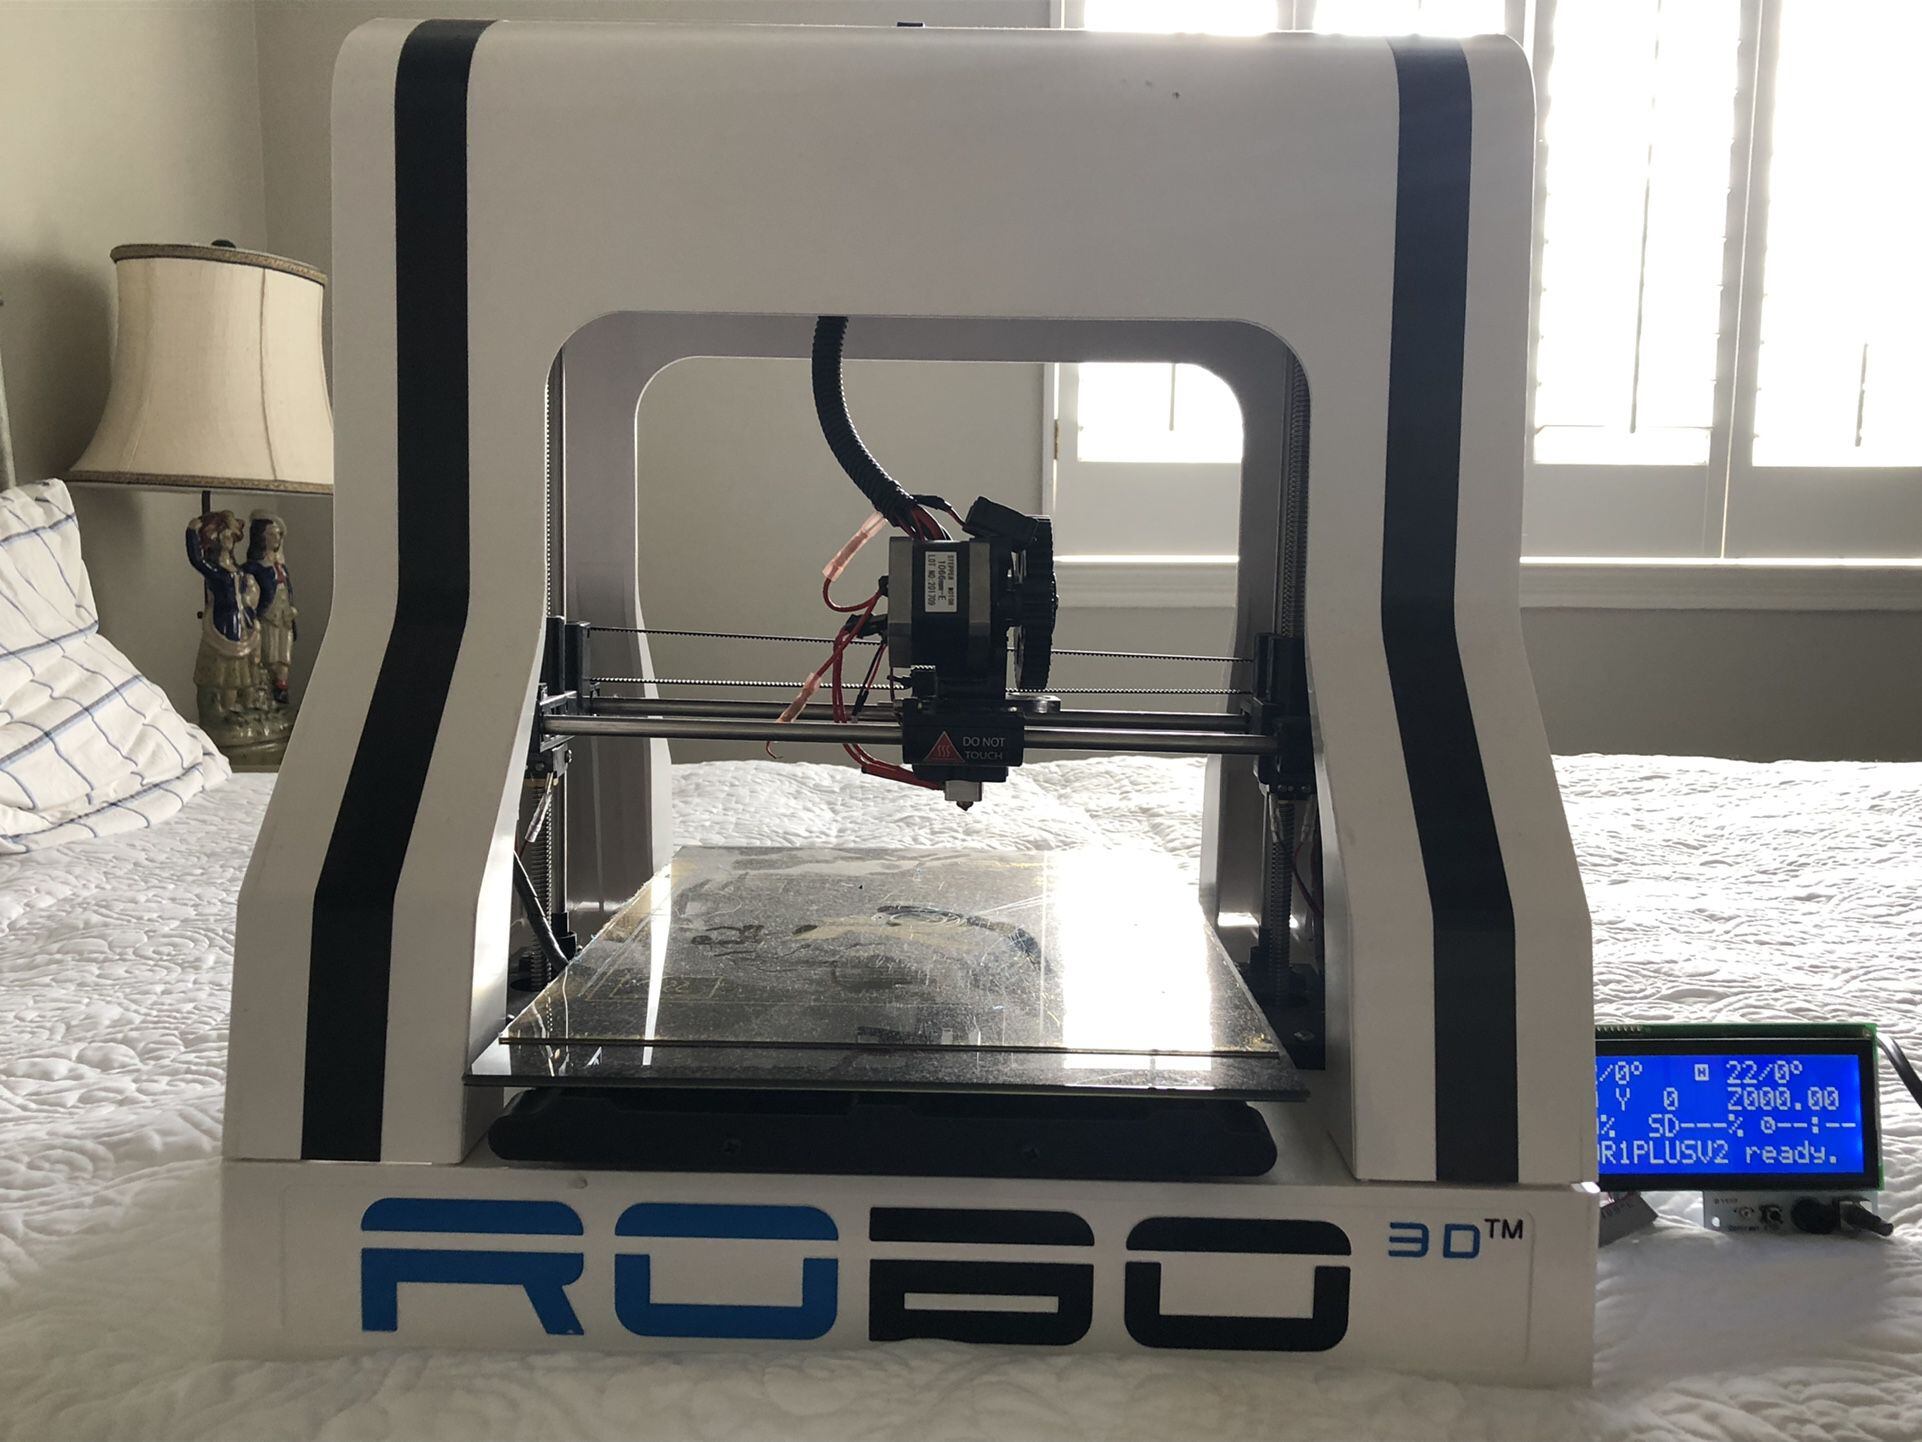 How To Use The Sd Card In A Robo Personal 3D Printer